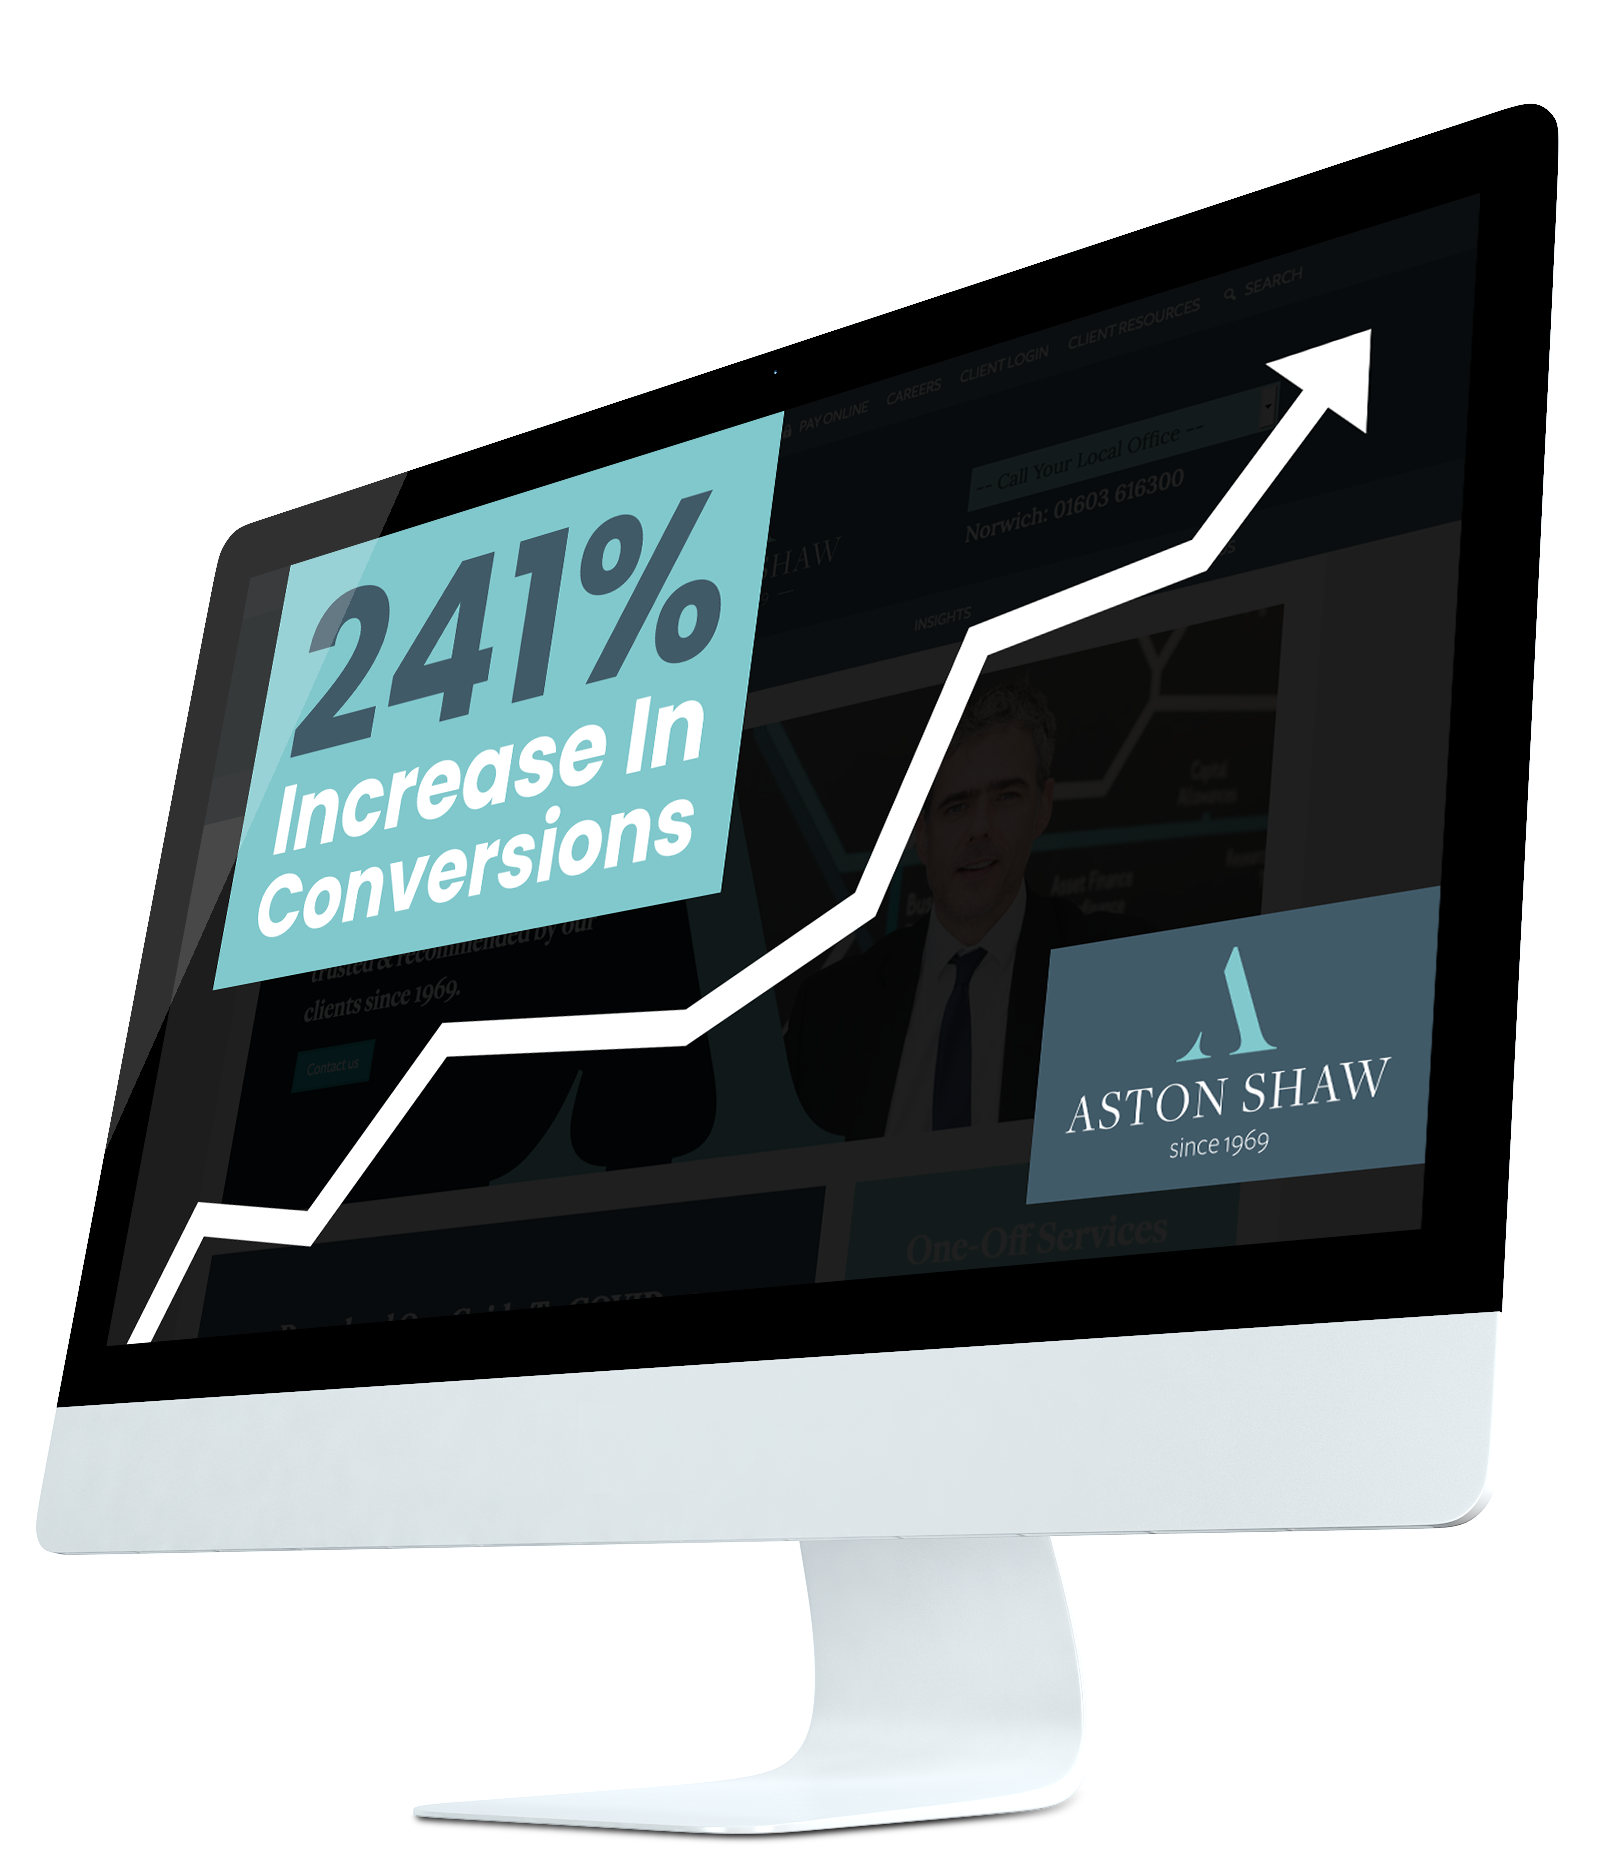 241% increase in conversions